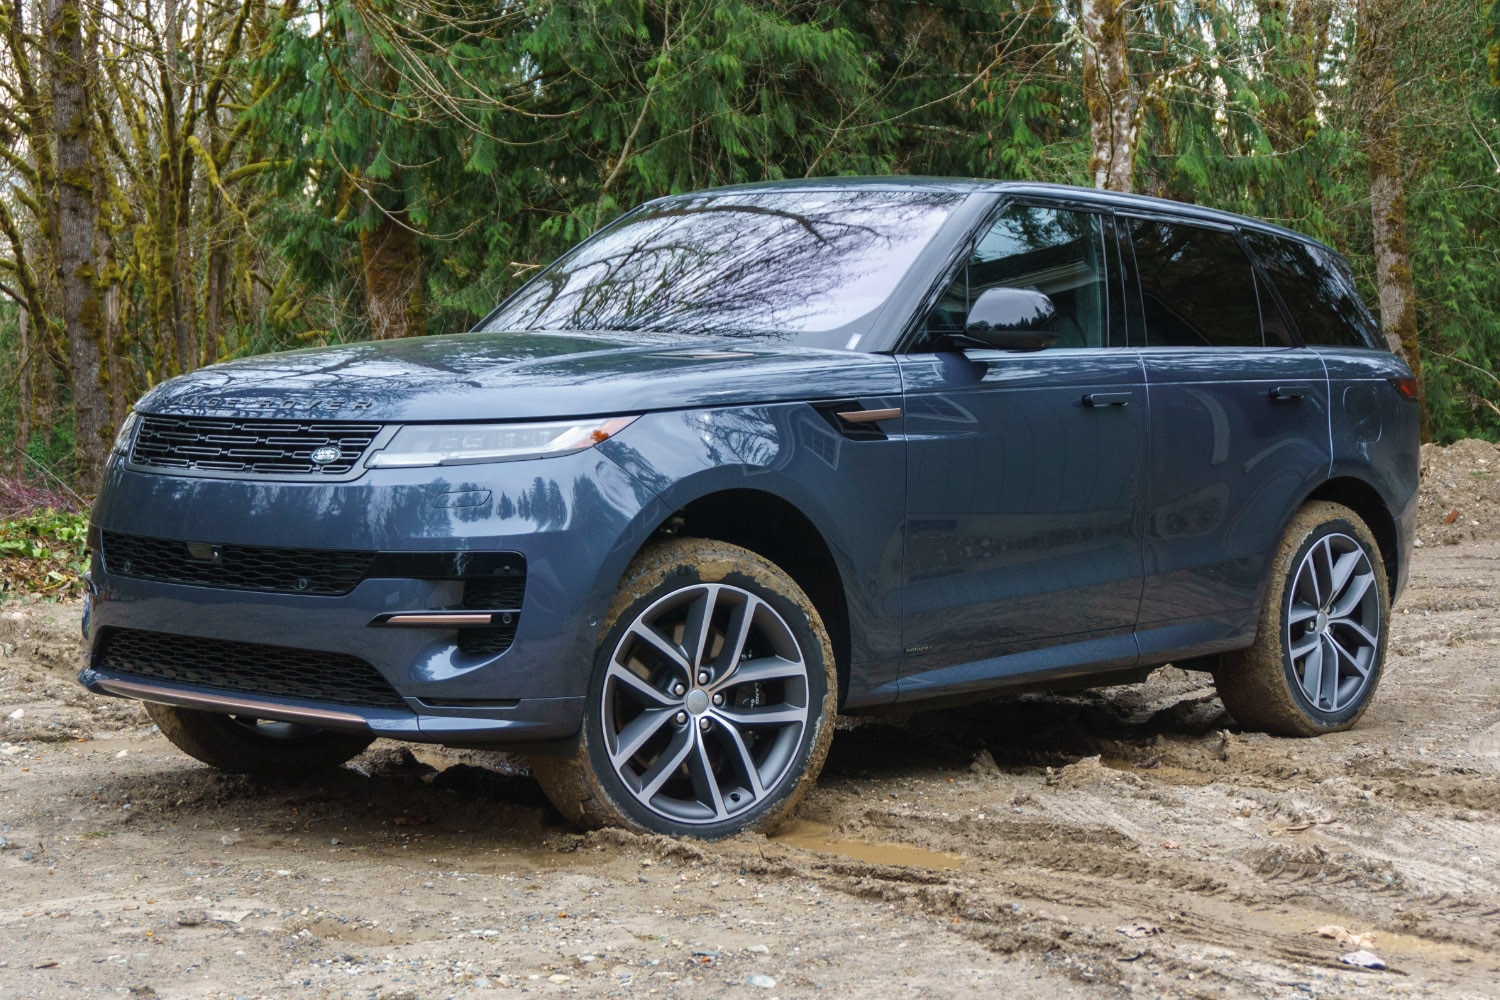 2023 Land Rover Range Rover Sport PHEV in Varesine Blue parked on mud, front-three-quarter view.